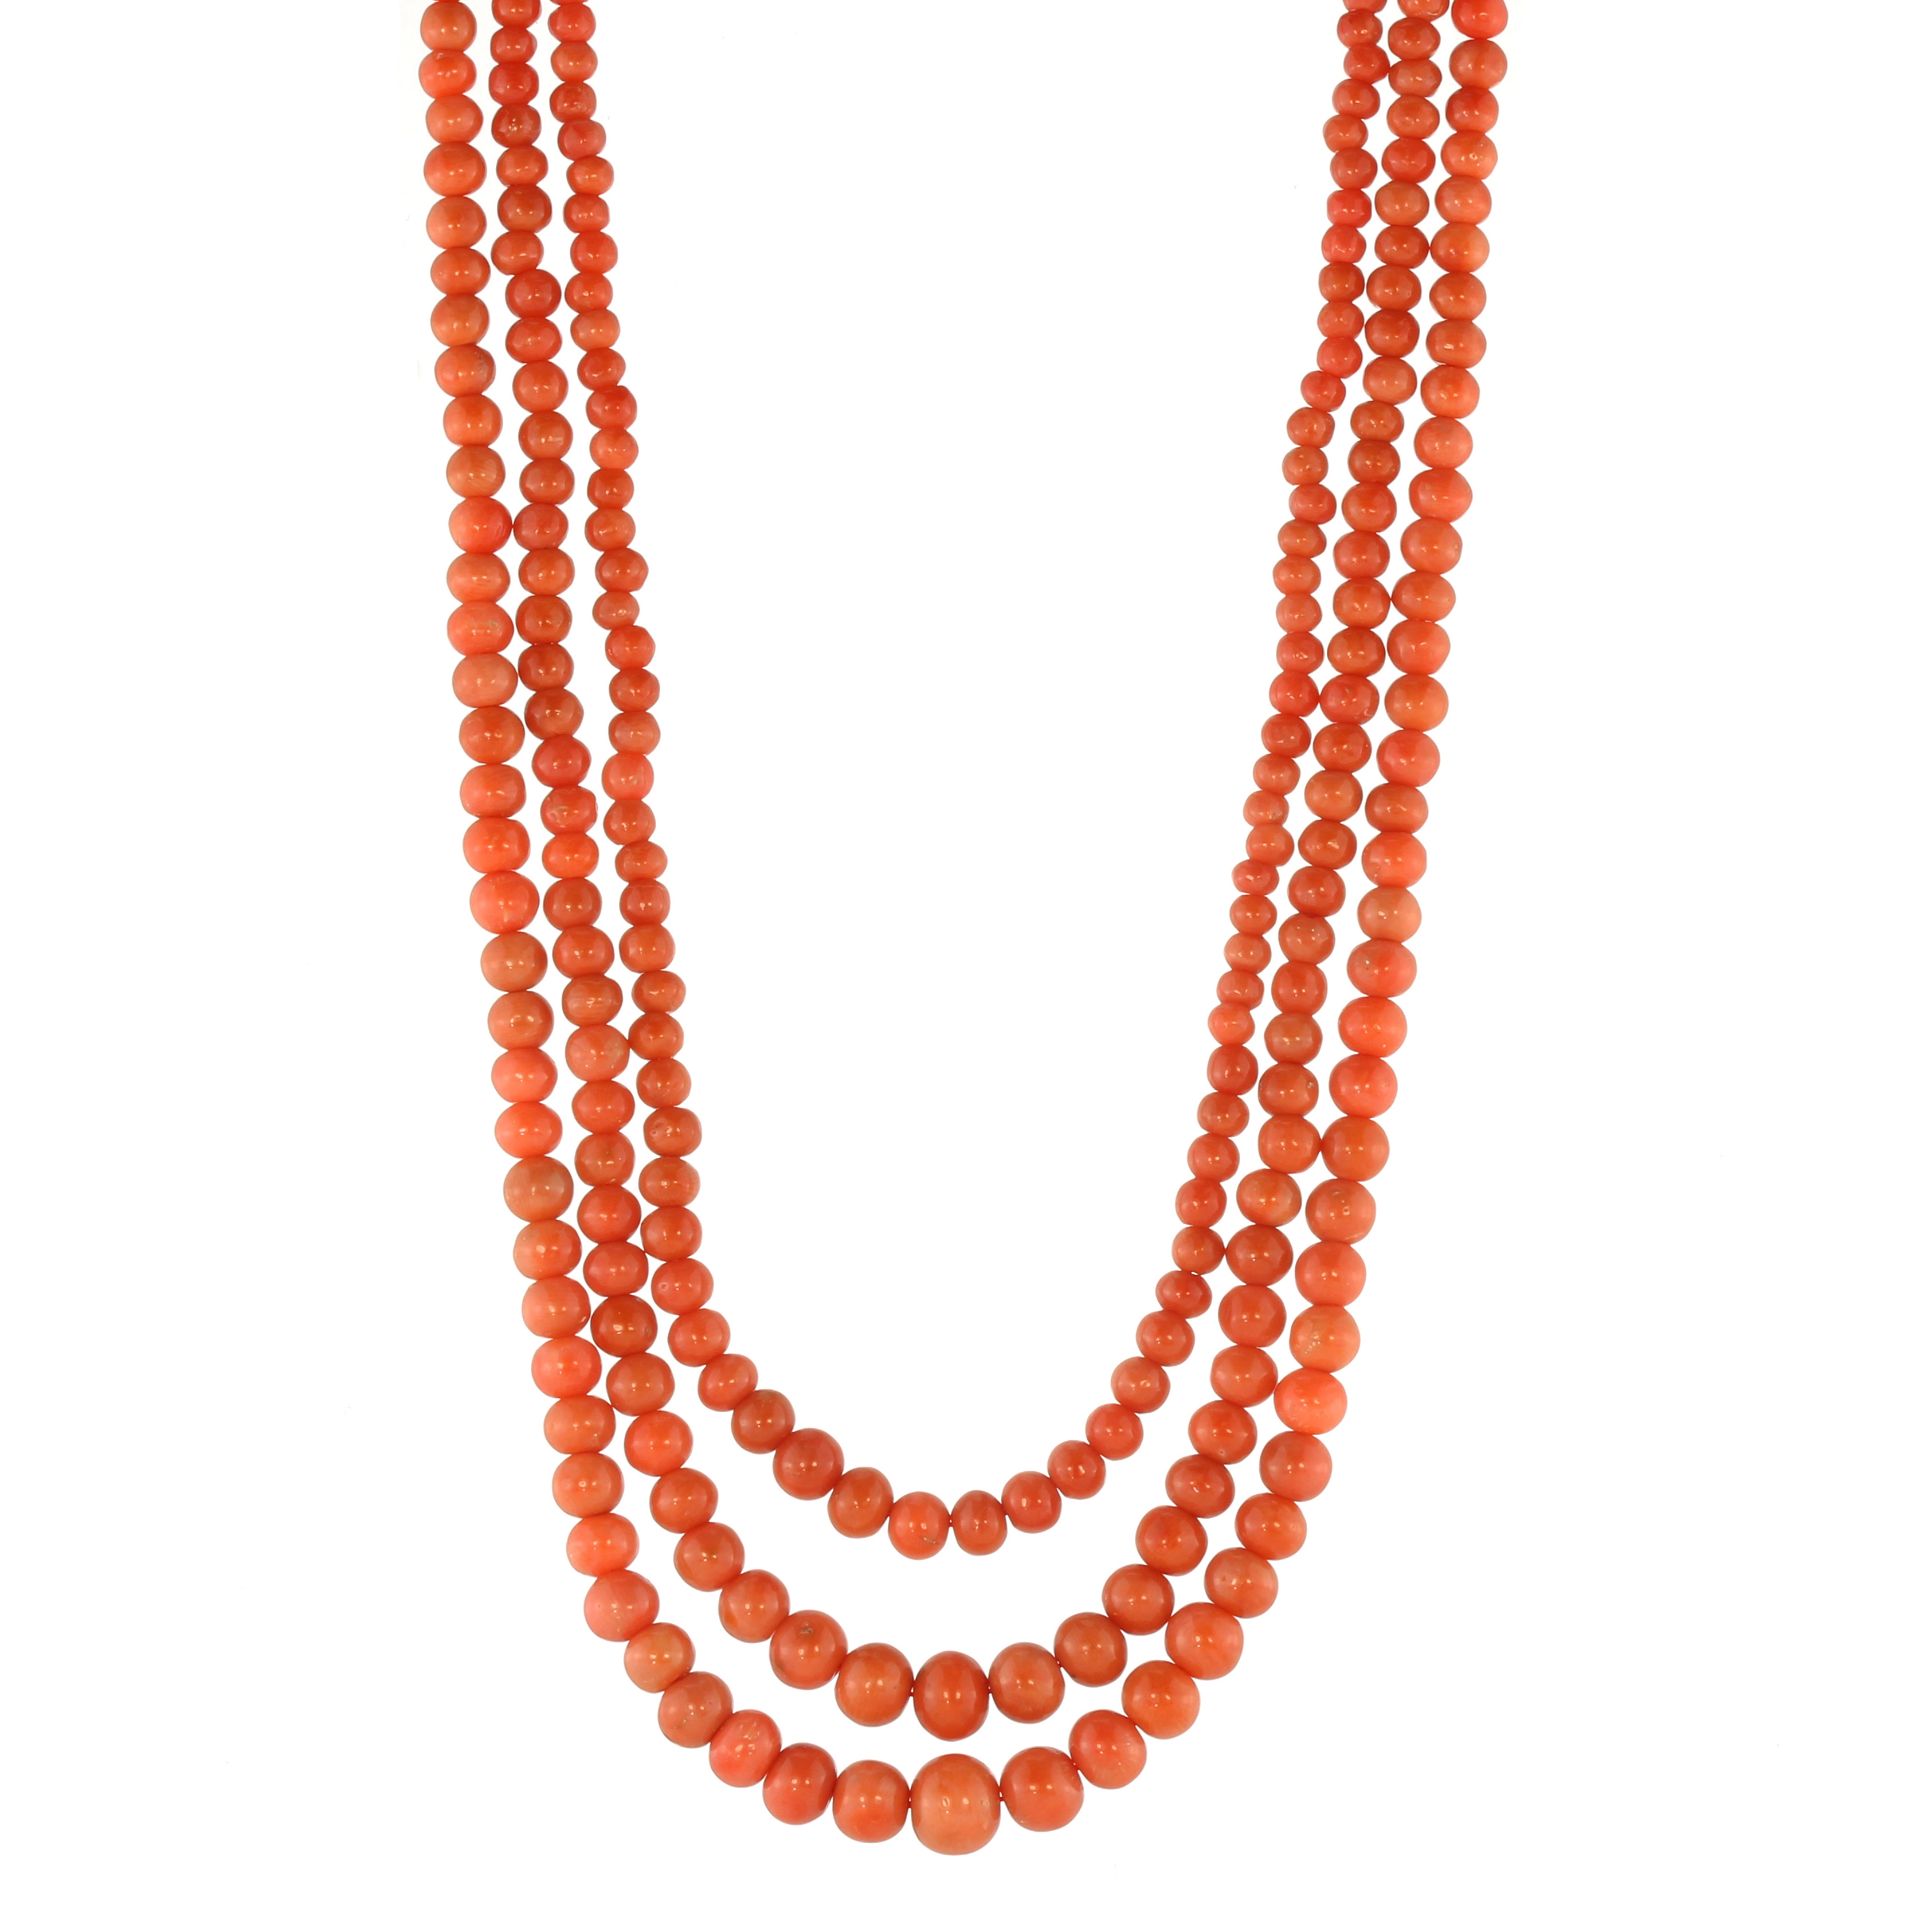 AN ANTIQUE THREE STRAND CORAL BEAD NECKLACE comprising three rows of graduated coral beads up to 8.